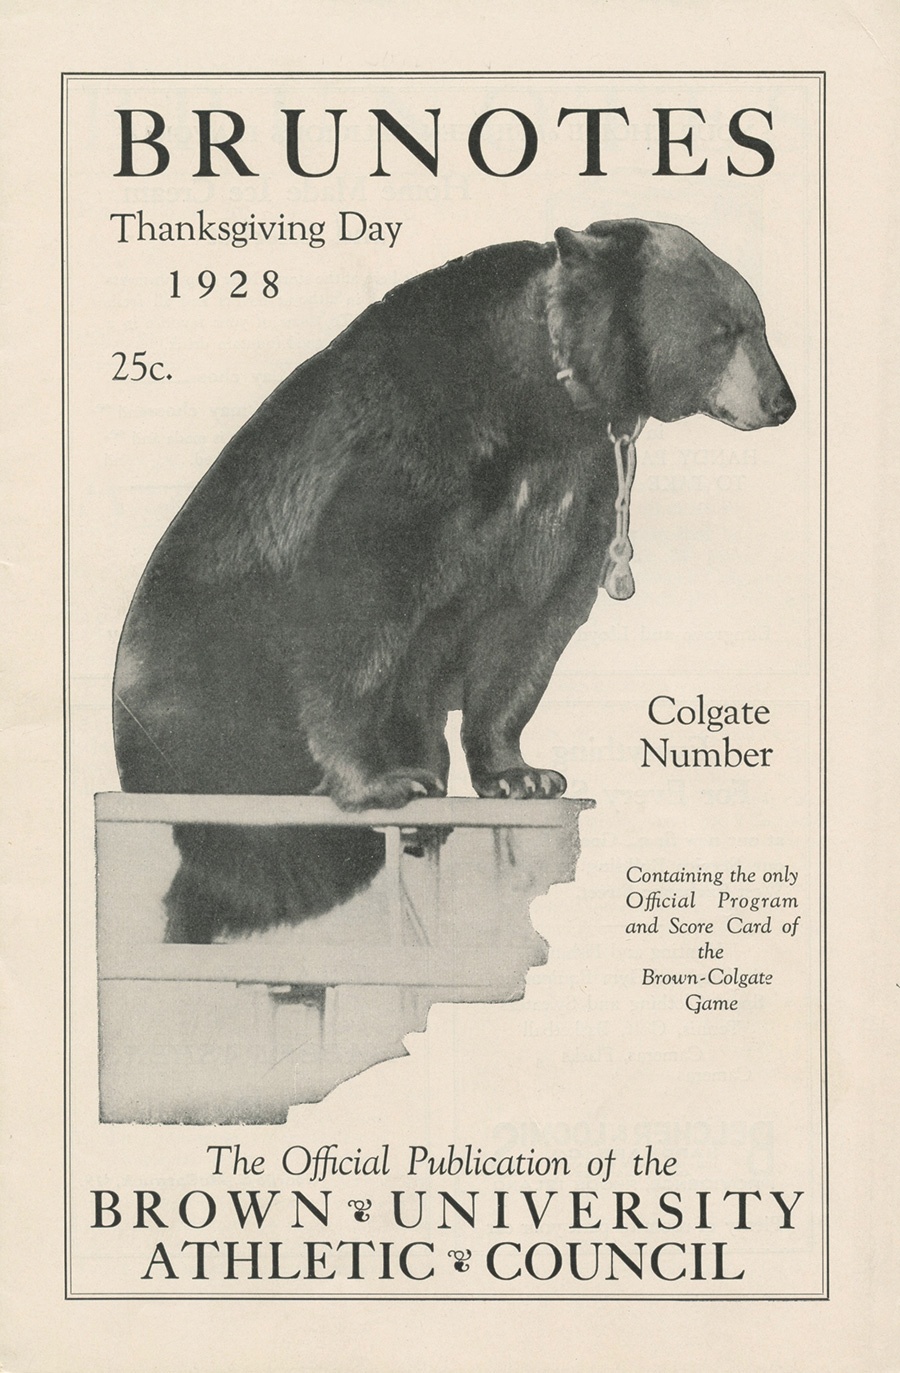 Vintage Brunotes poster from Thanksgiving 1928, featuring a bear.